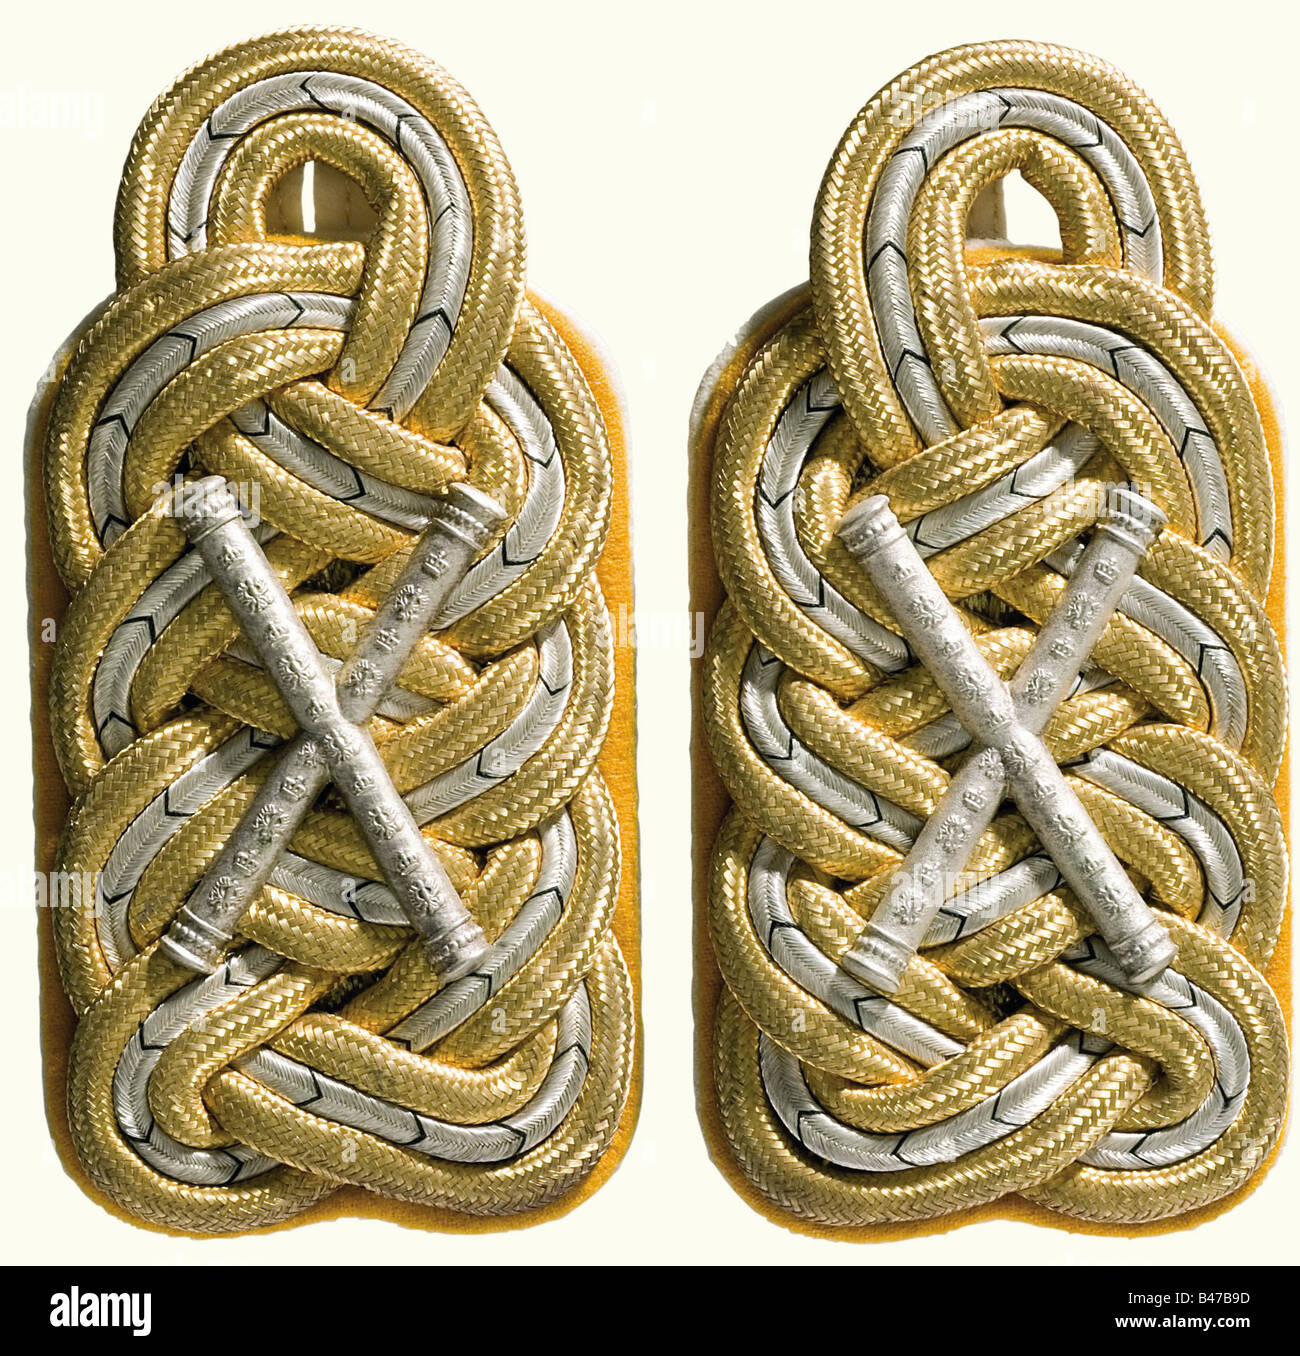 Field Marshal Paul von Hindenburg, a pair of epaulets as Field Marshal and à la suite in the 3. Garde-Regiment zu Fuß Large pattern from 1915 with gold/silver weave on white backing and yellow additional colour with silver marshal's batons (slightly darkened).Paul von Hindenburg was promoted to field marshal on 27 November 1914. historic, historical, 1910s, 20th century, First World War / WWI, world war, world wars, military, militaria, clipping, cut out, cut-out, cut-outs, object, objects, stills, fine arts, art, art object, art objects, artful, precious, coll, Stock Photo